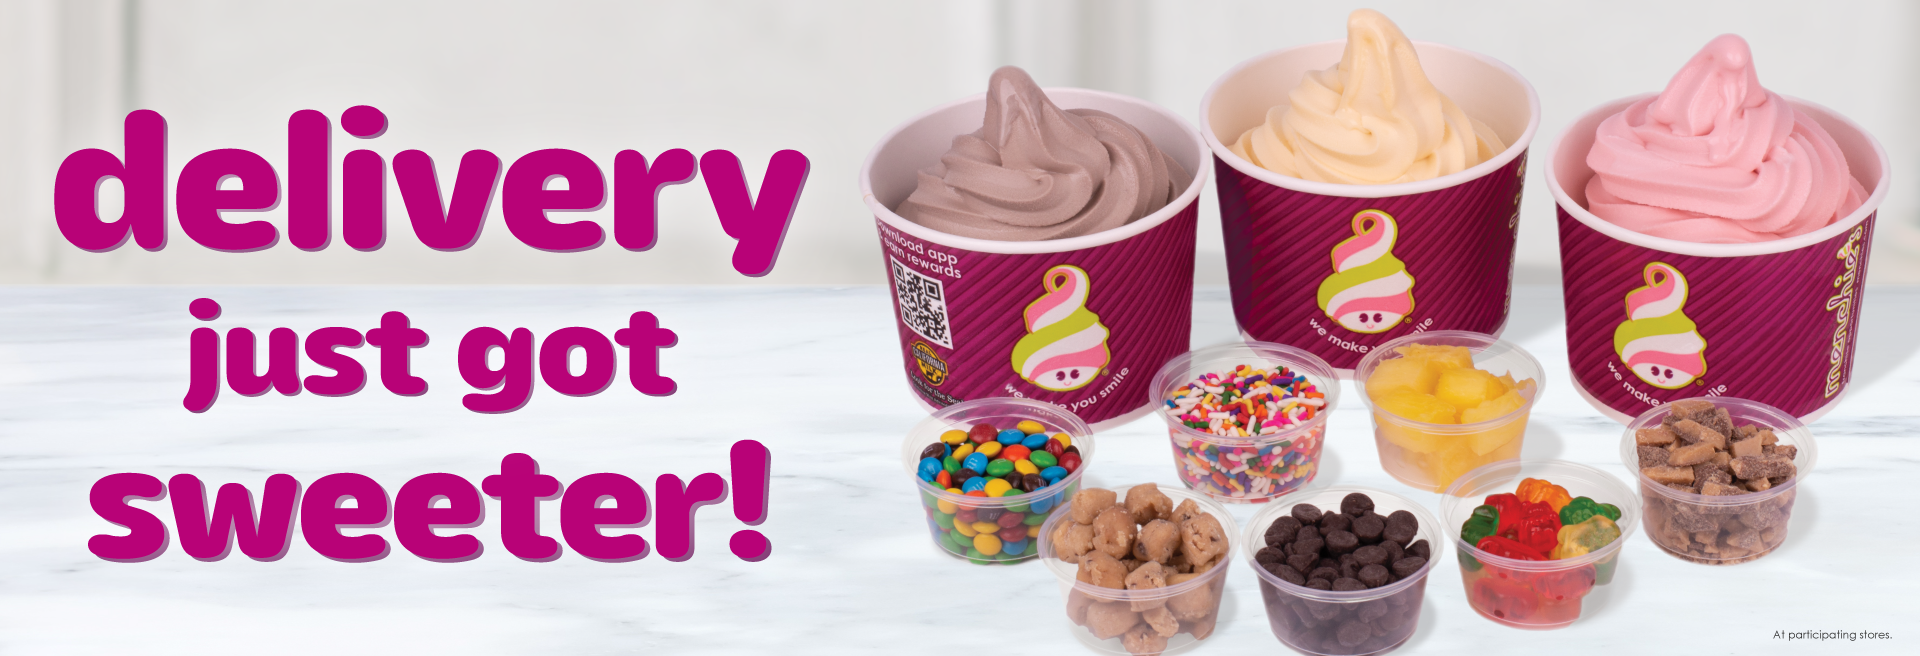 Your favorite froyo and toppings delivered right to your door!